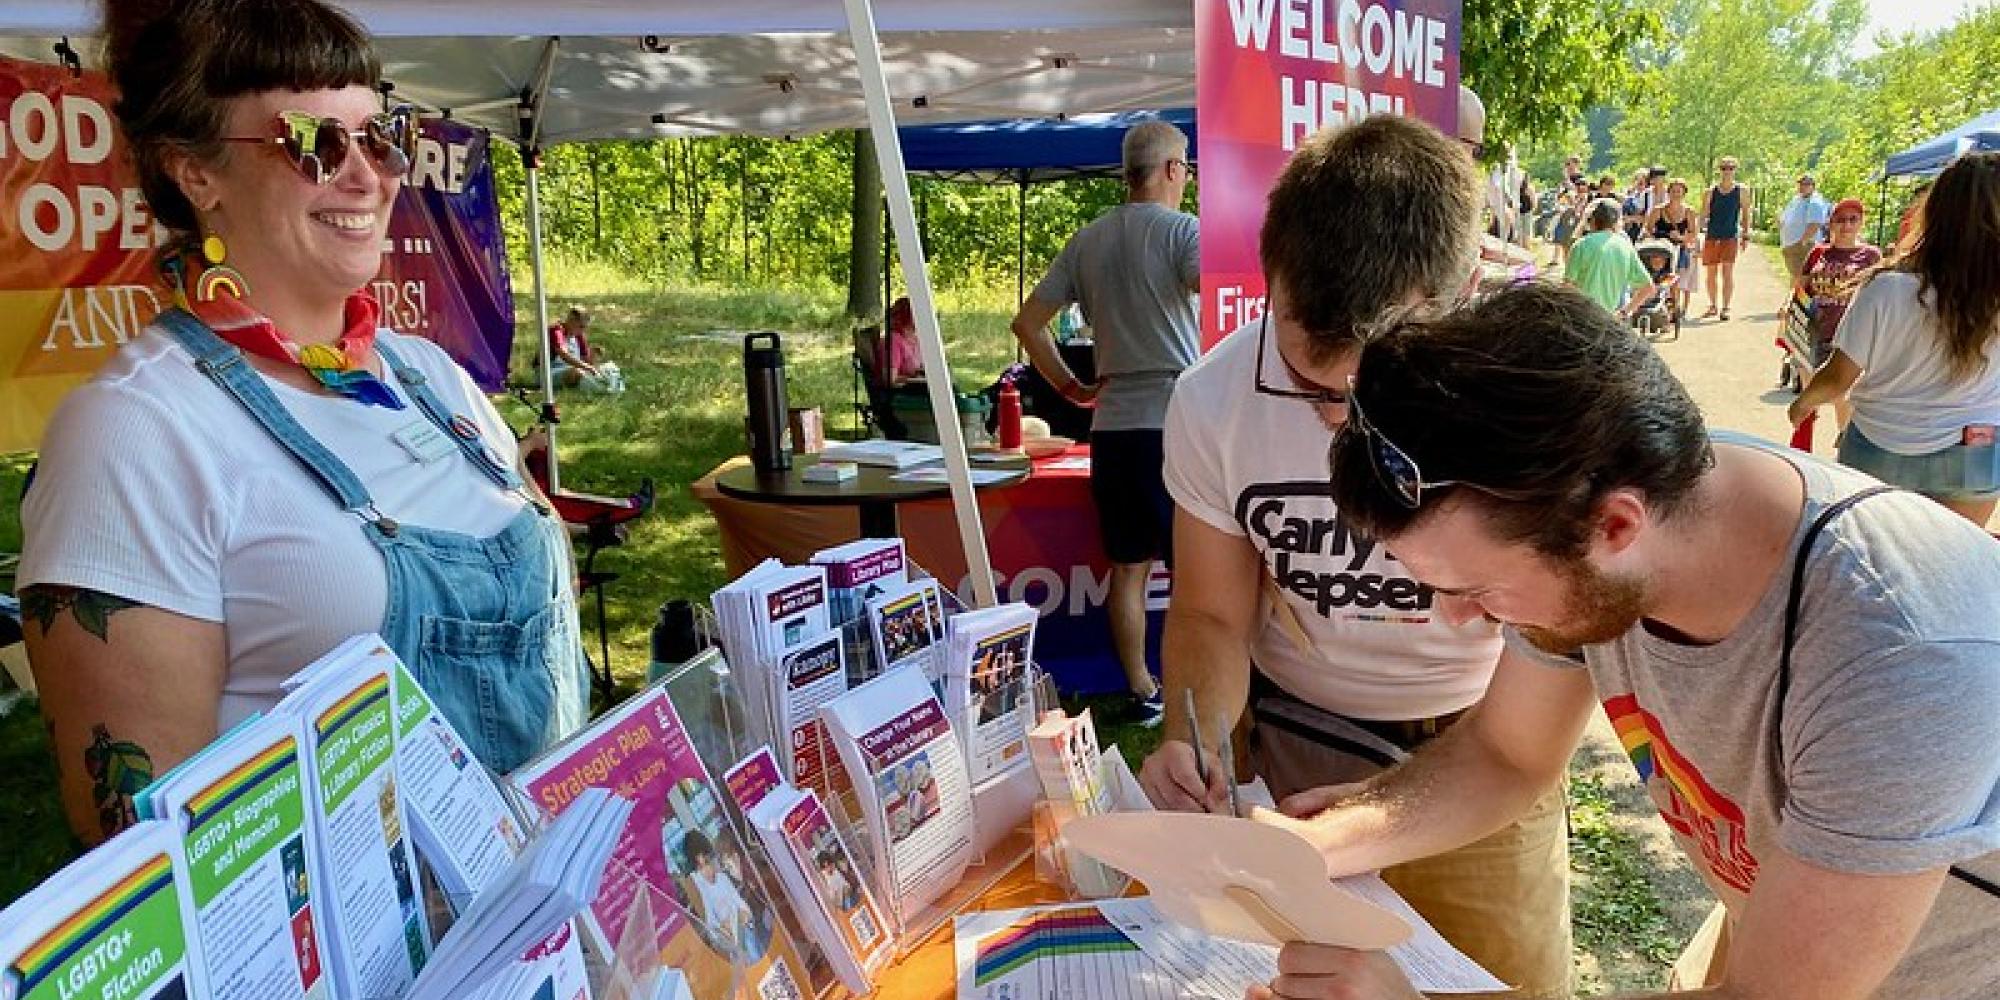 Madison Public Library attends the Magic Pride Festival at Warner Park